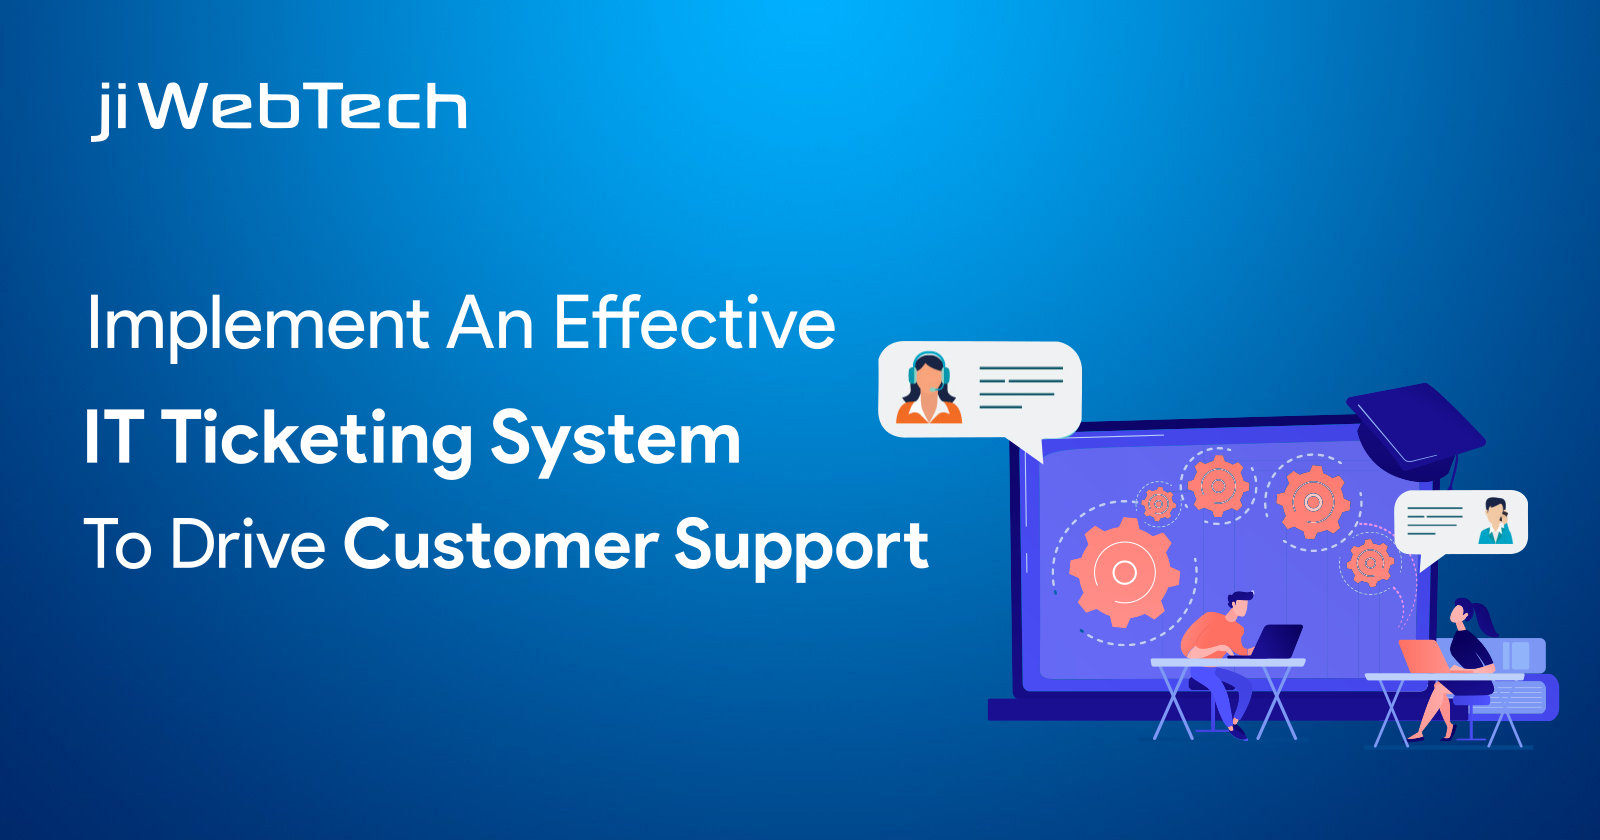 How to implement an effective IT Ticketing System for seamless customer support?